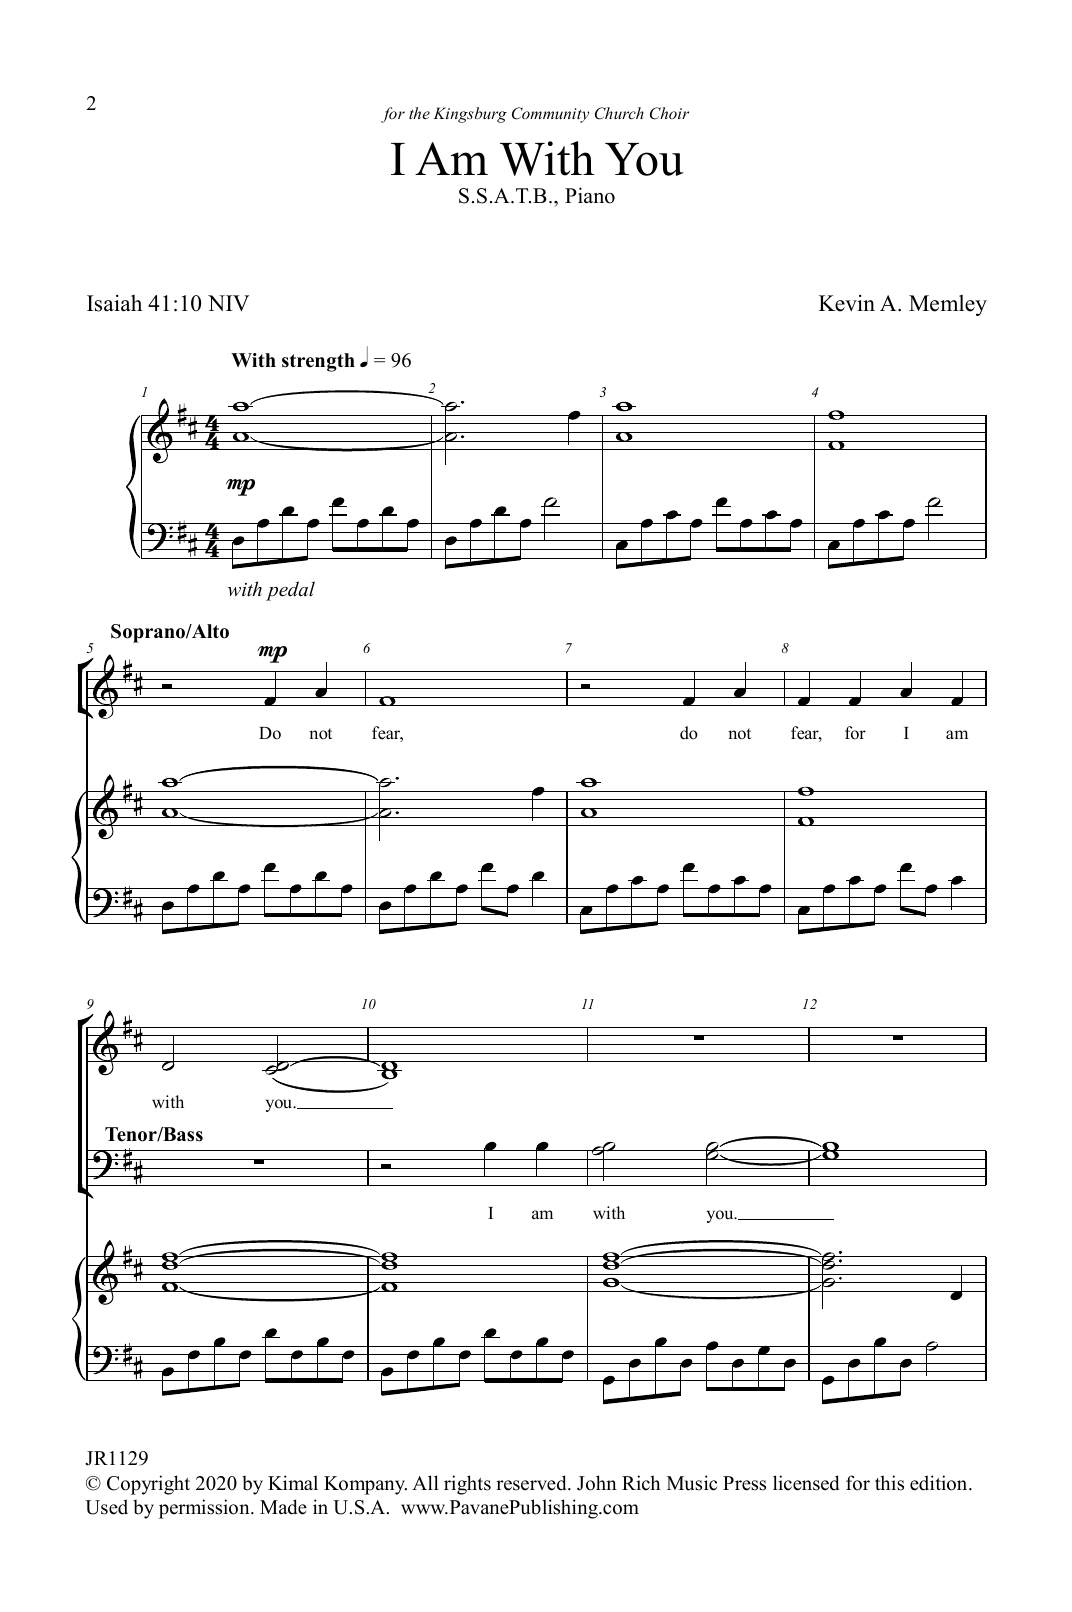 Download Kevin A. Memley I Am With You Sheet Music